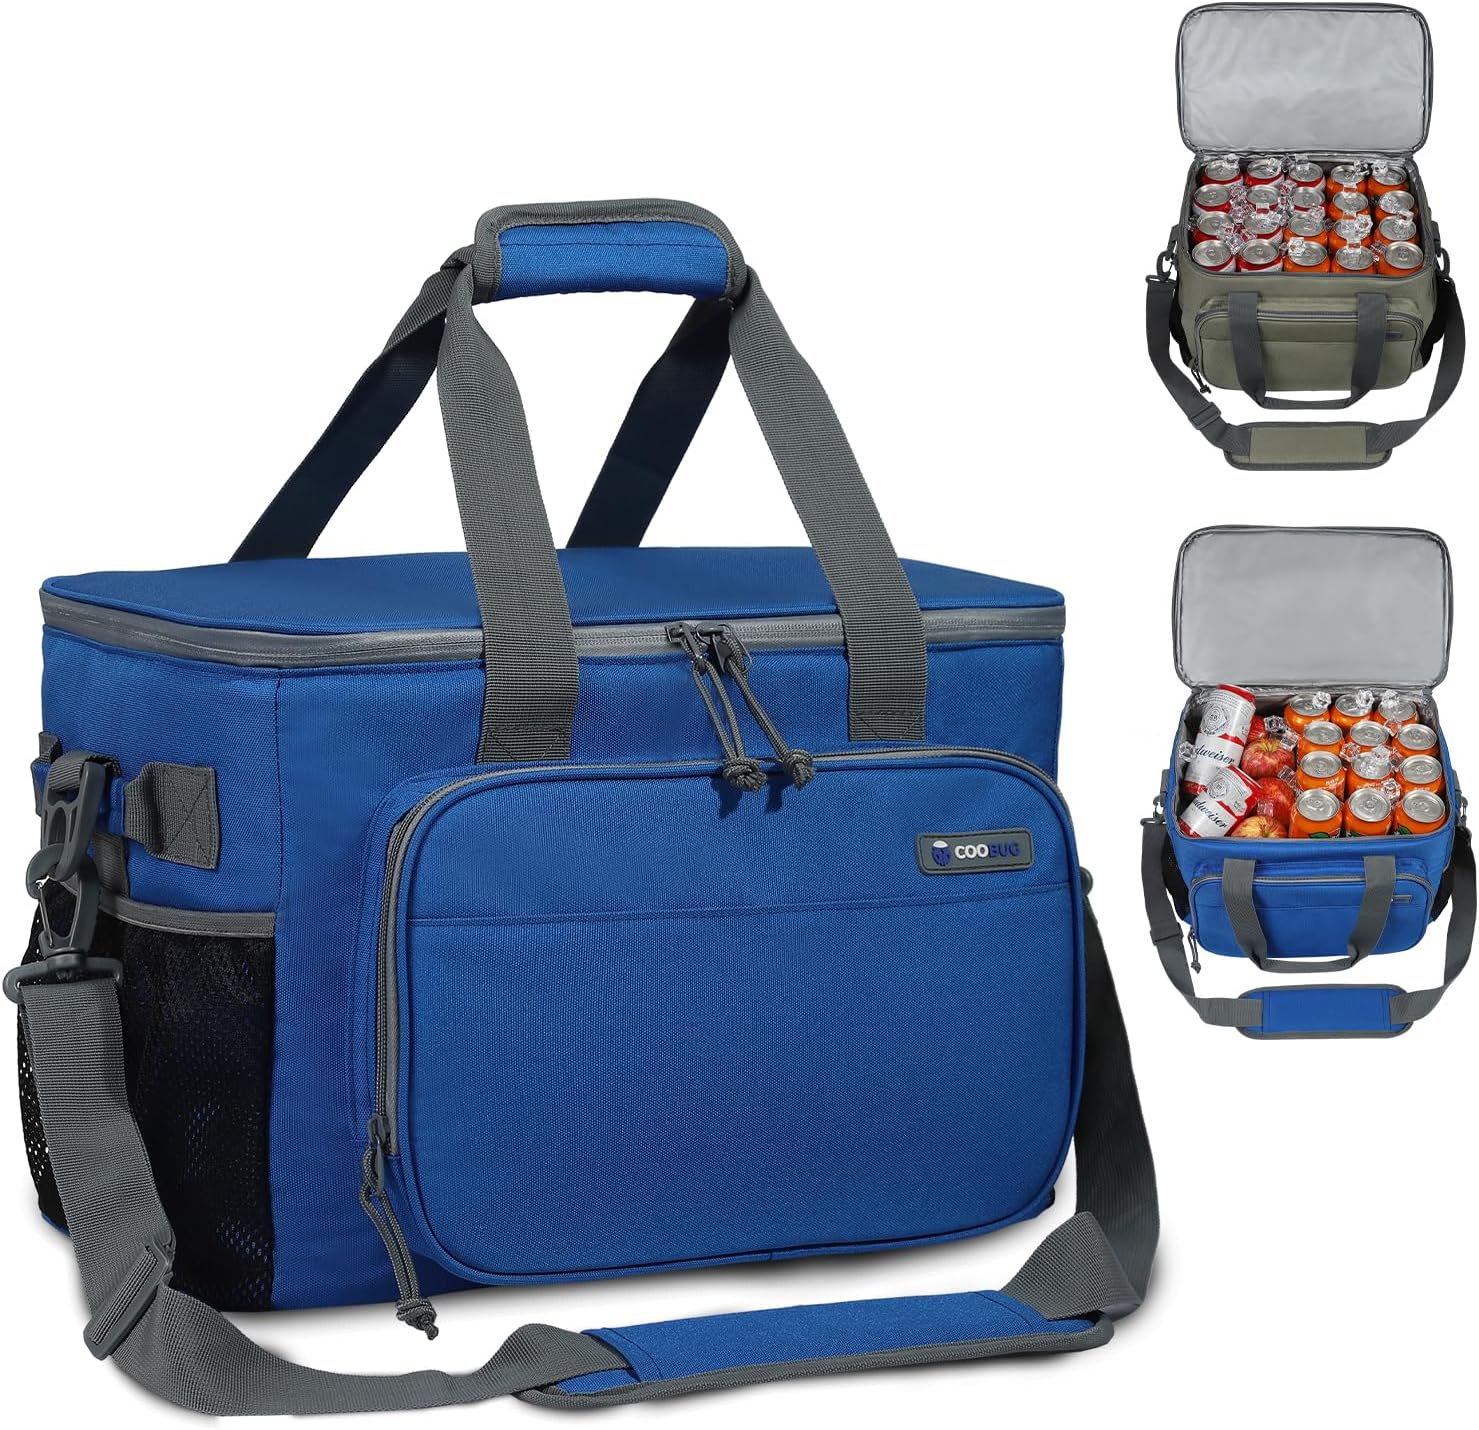 Large Cooler Bag 40 Cans Insulated Lunch Bag Lightweight Portable Cool